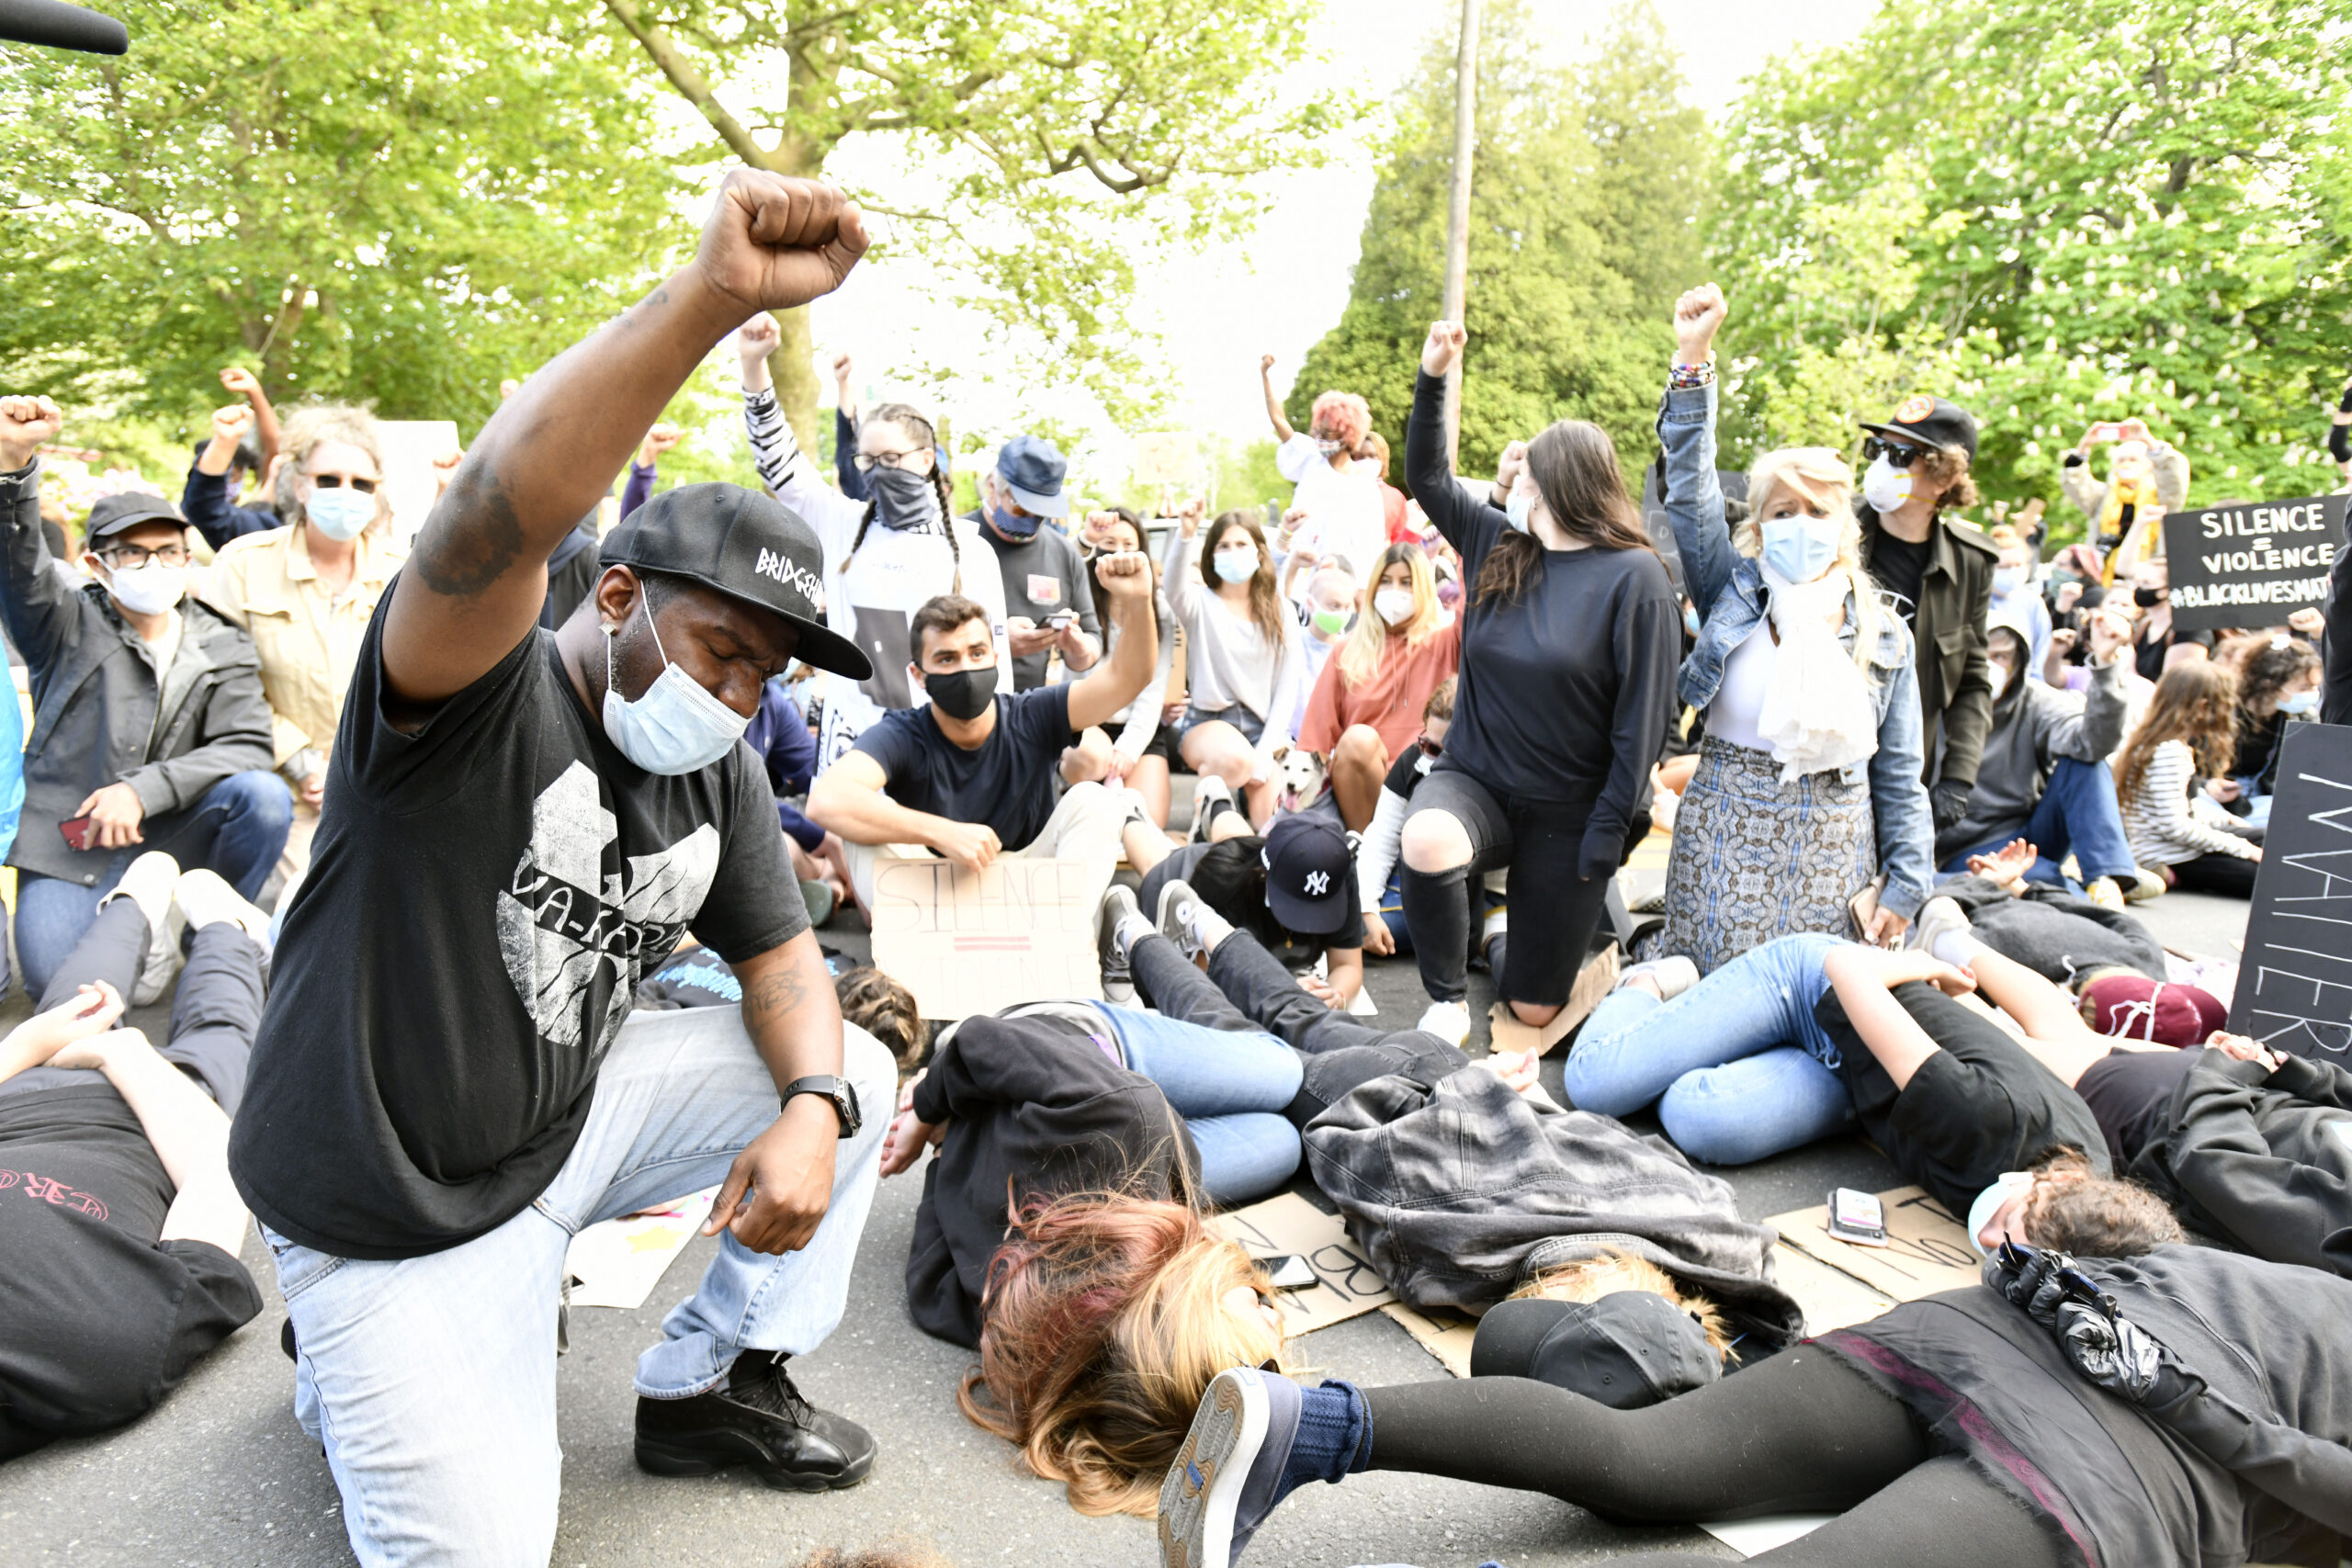 Masks became a common sight in everyday life. Hundreds of people attended the Black Lives Matter protest in Bridgehampton in June of 2020, masked.  DANA SHAW